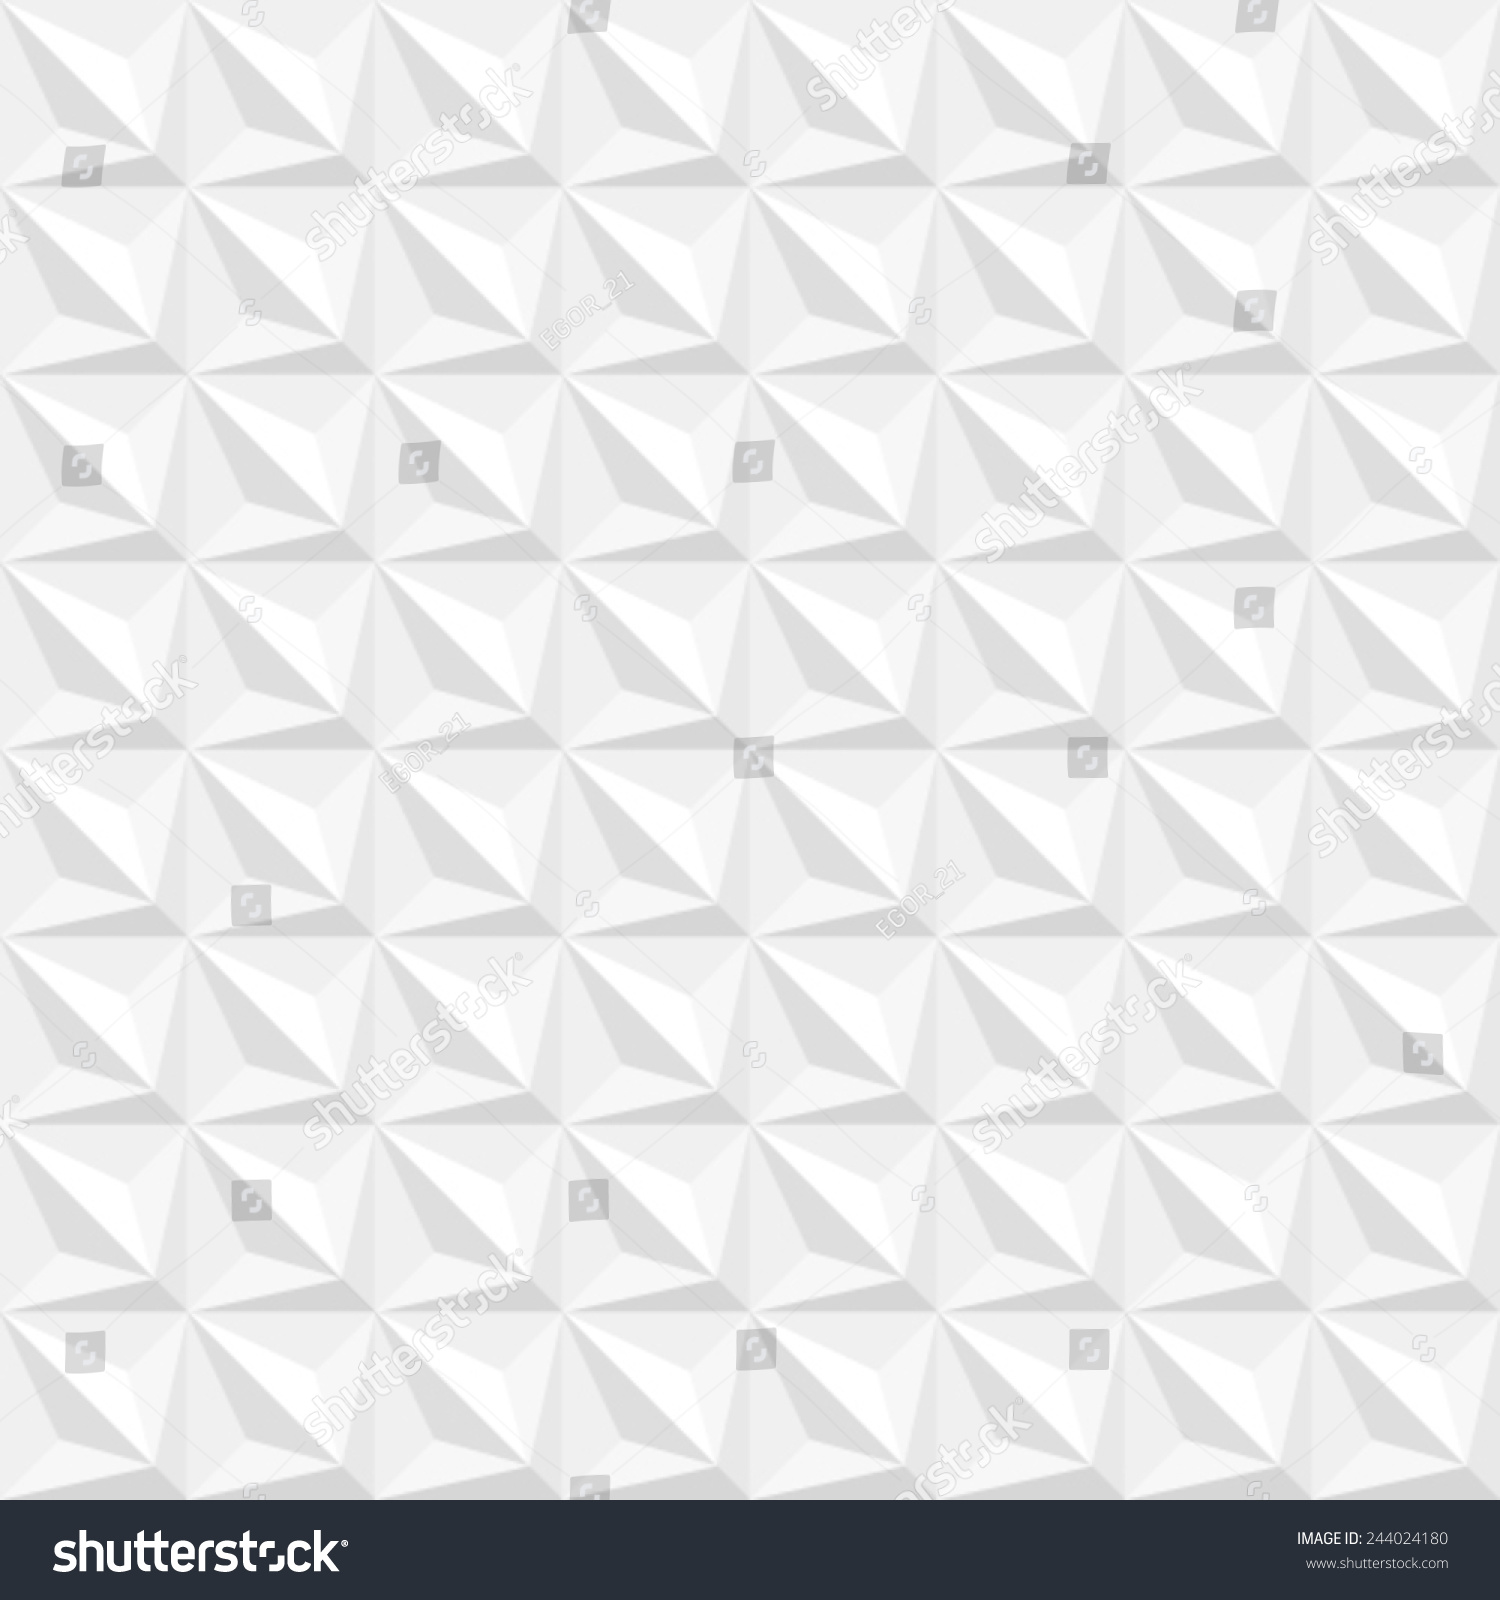 Abstract 3d Geometric Background White Seamless Stock Vector 244024180 ...